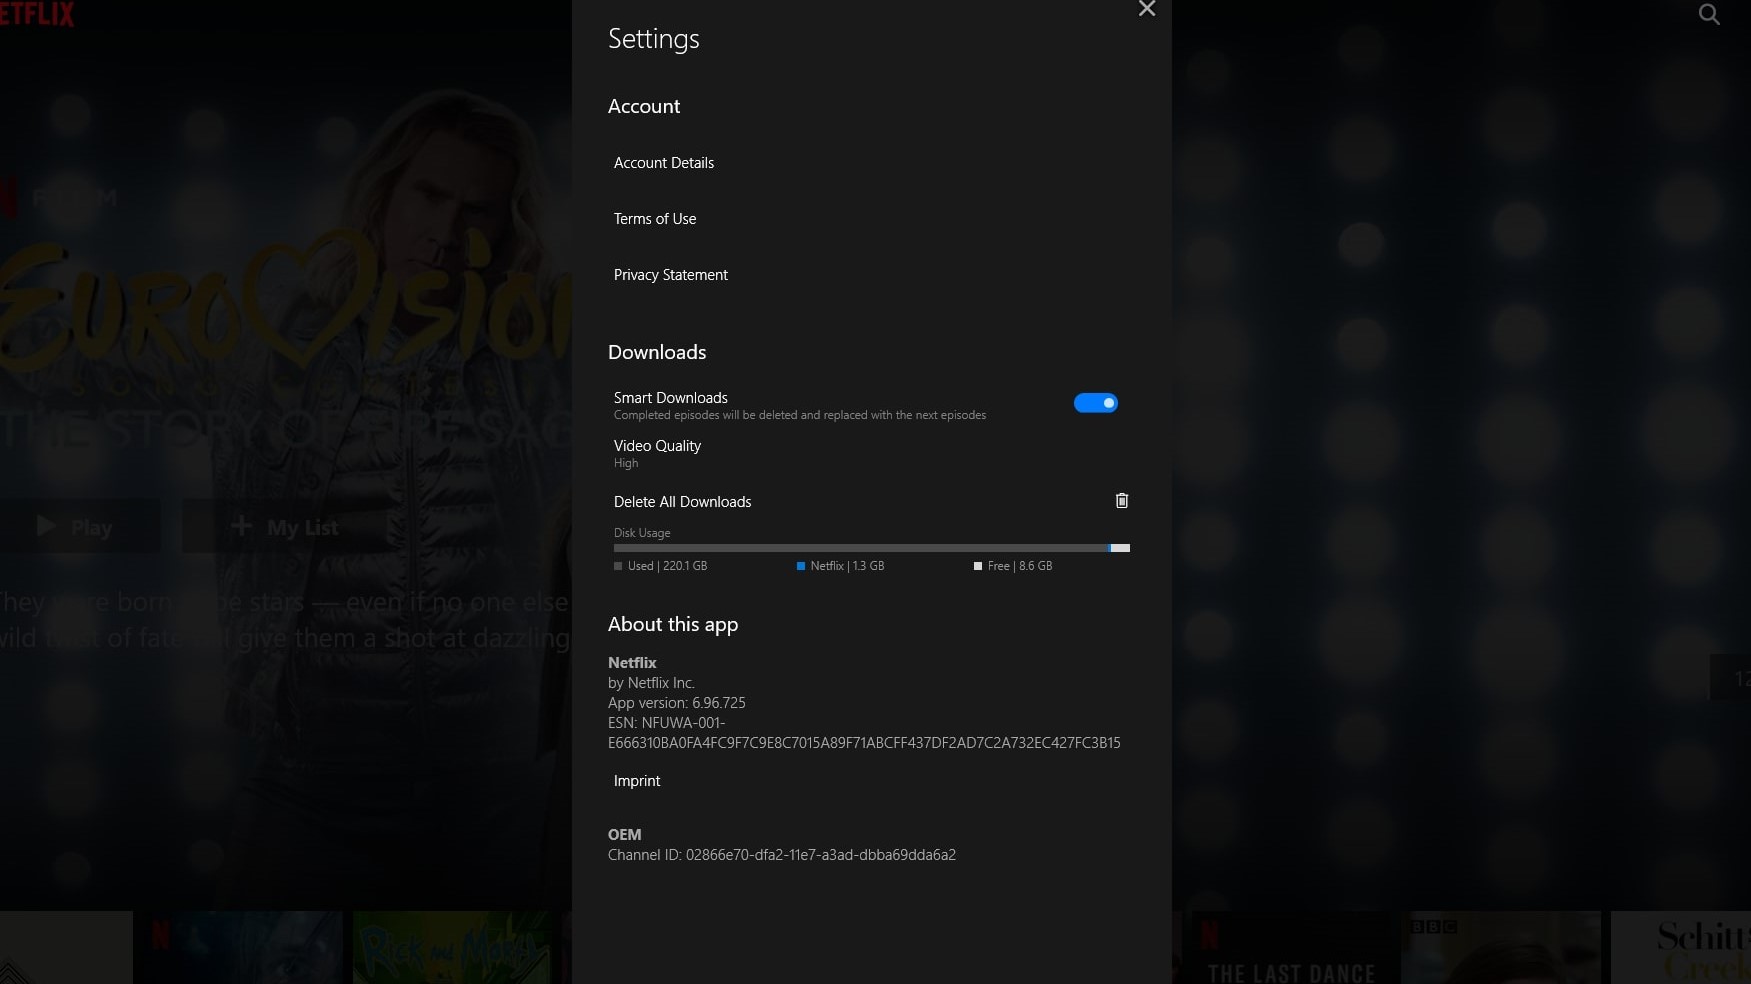 Download settings let you adjust picture quality, among other things.